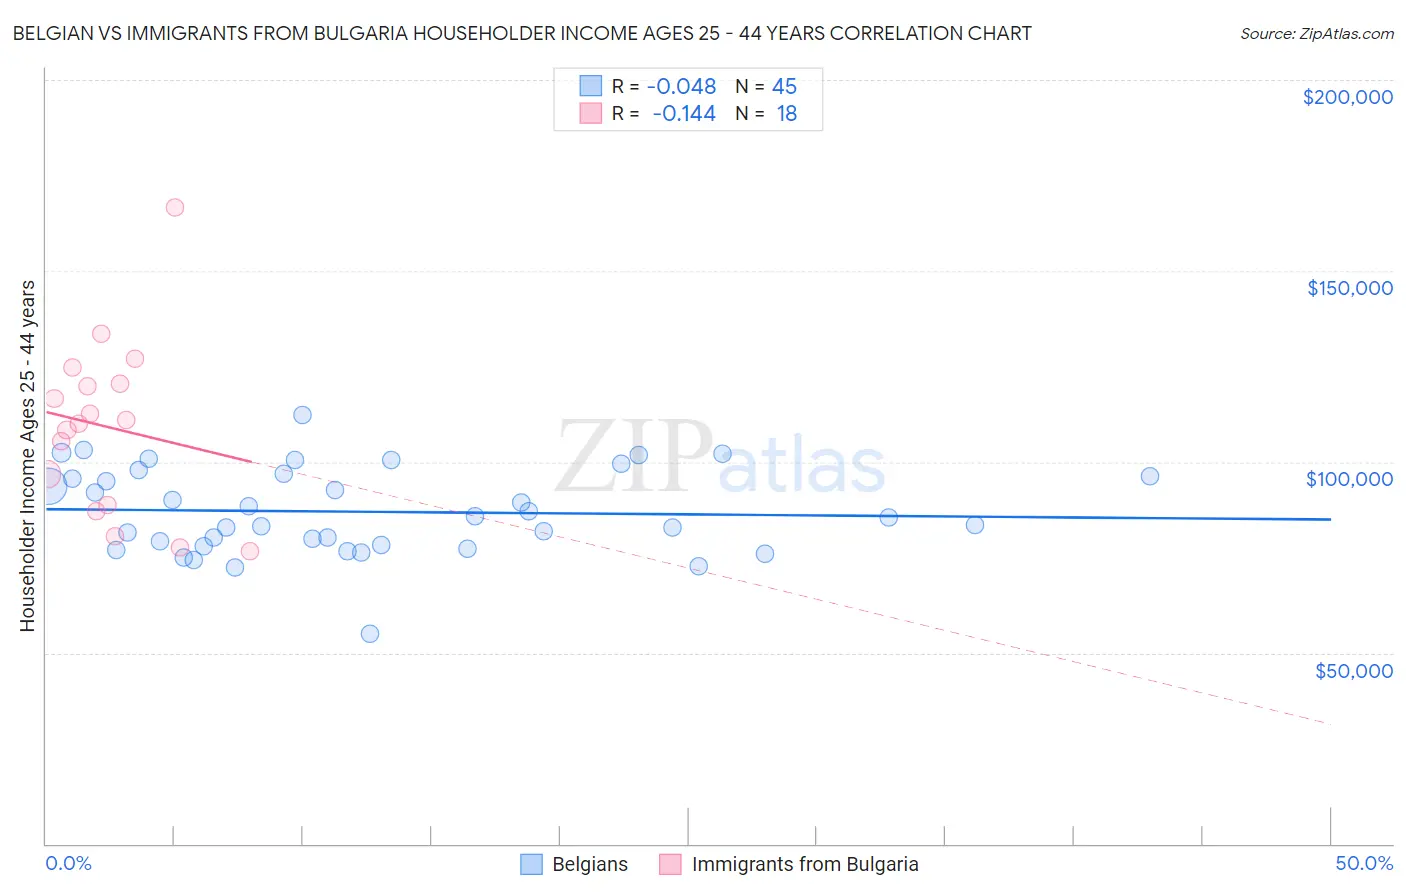 Belgian vs Immigrants from Bulgaria Householder Income Ages 25 - 44 years